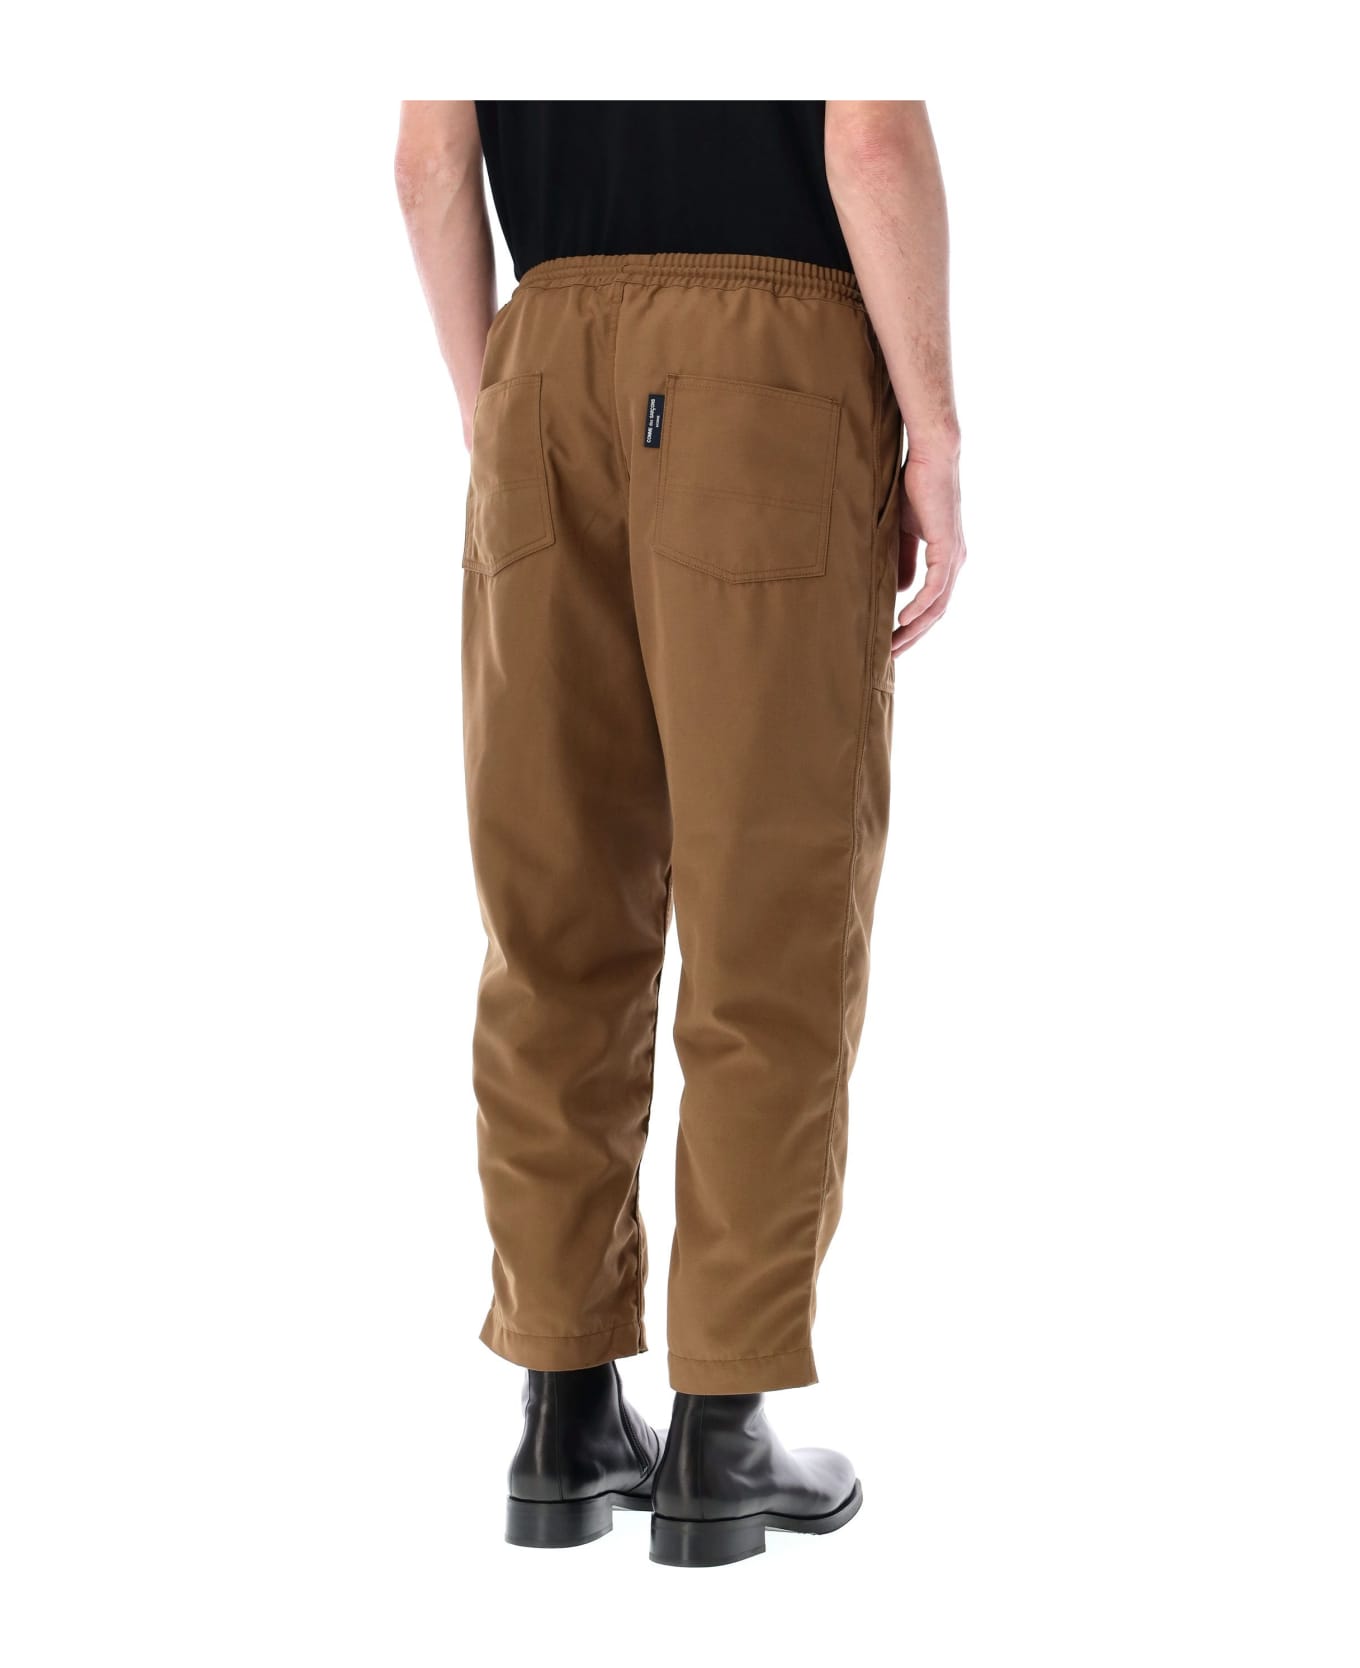 Comme des Garçons Homme Elasticated Waistband Chino Pants - BROWN